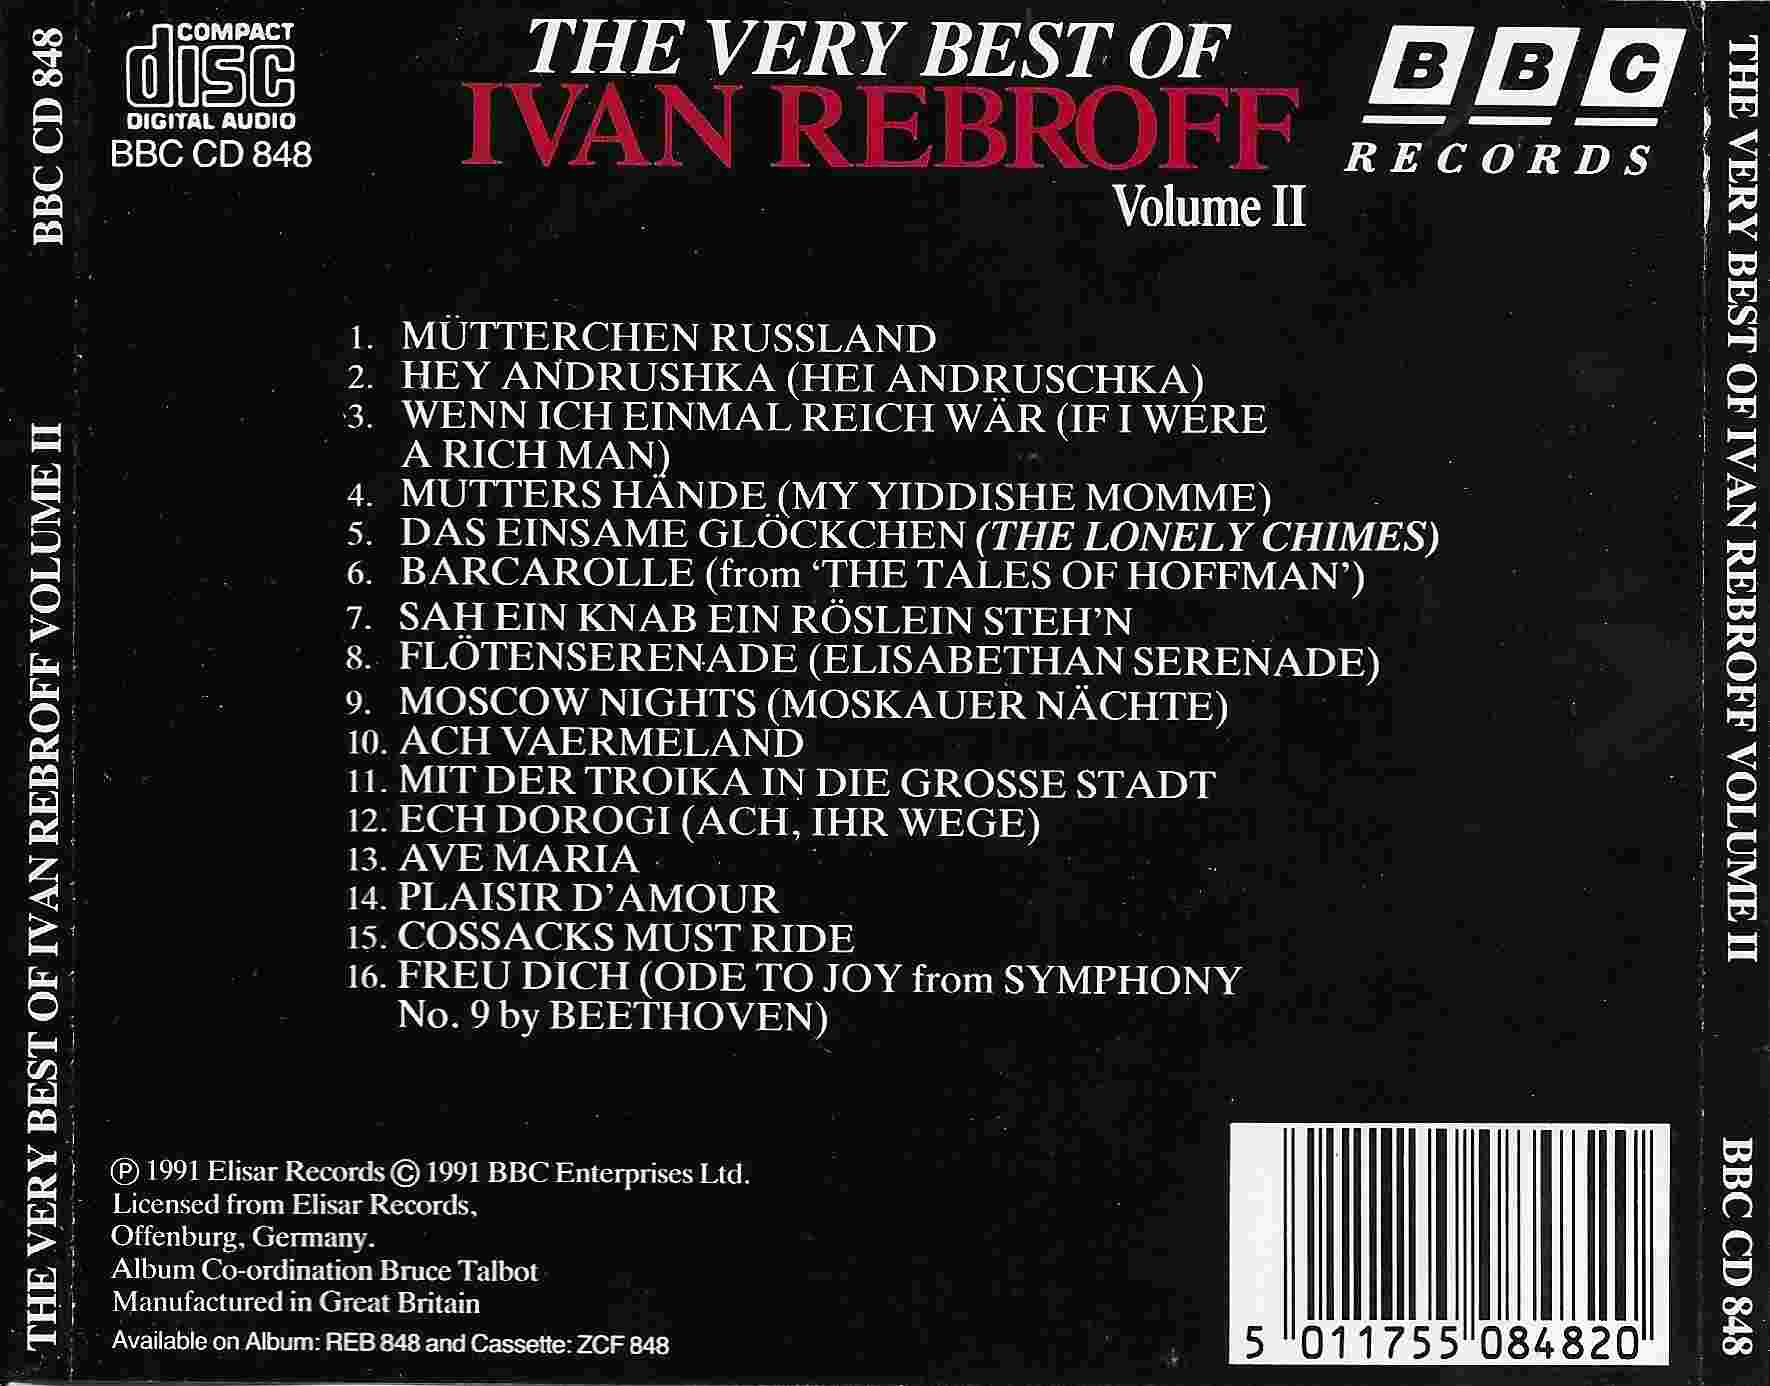 Picture of BBCCD848 The very best of Ivan Rebroff - Volume 2 by artist Various from the BBC records and Tapes library